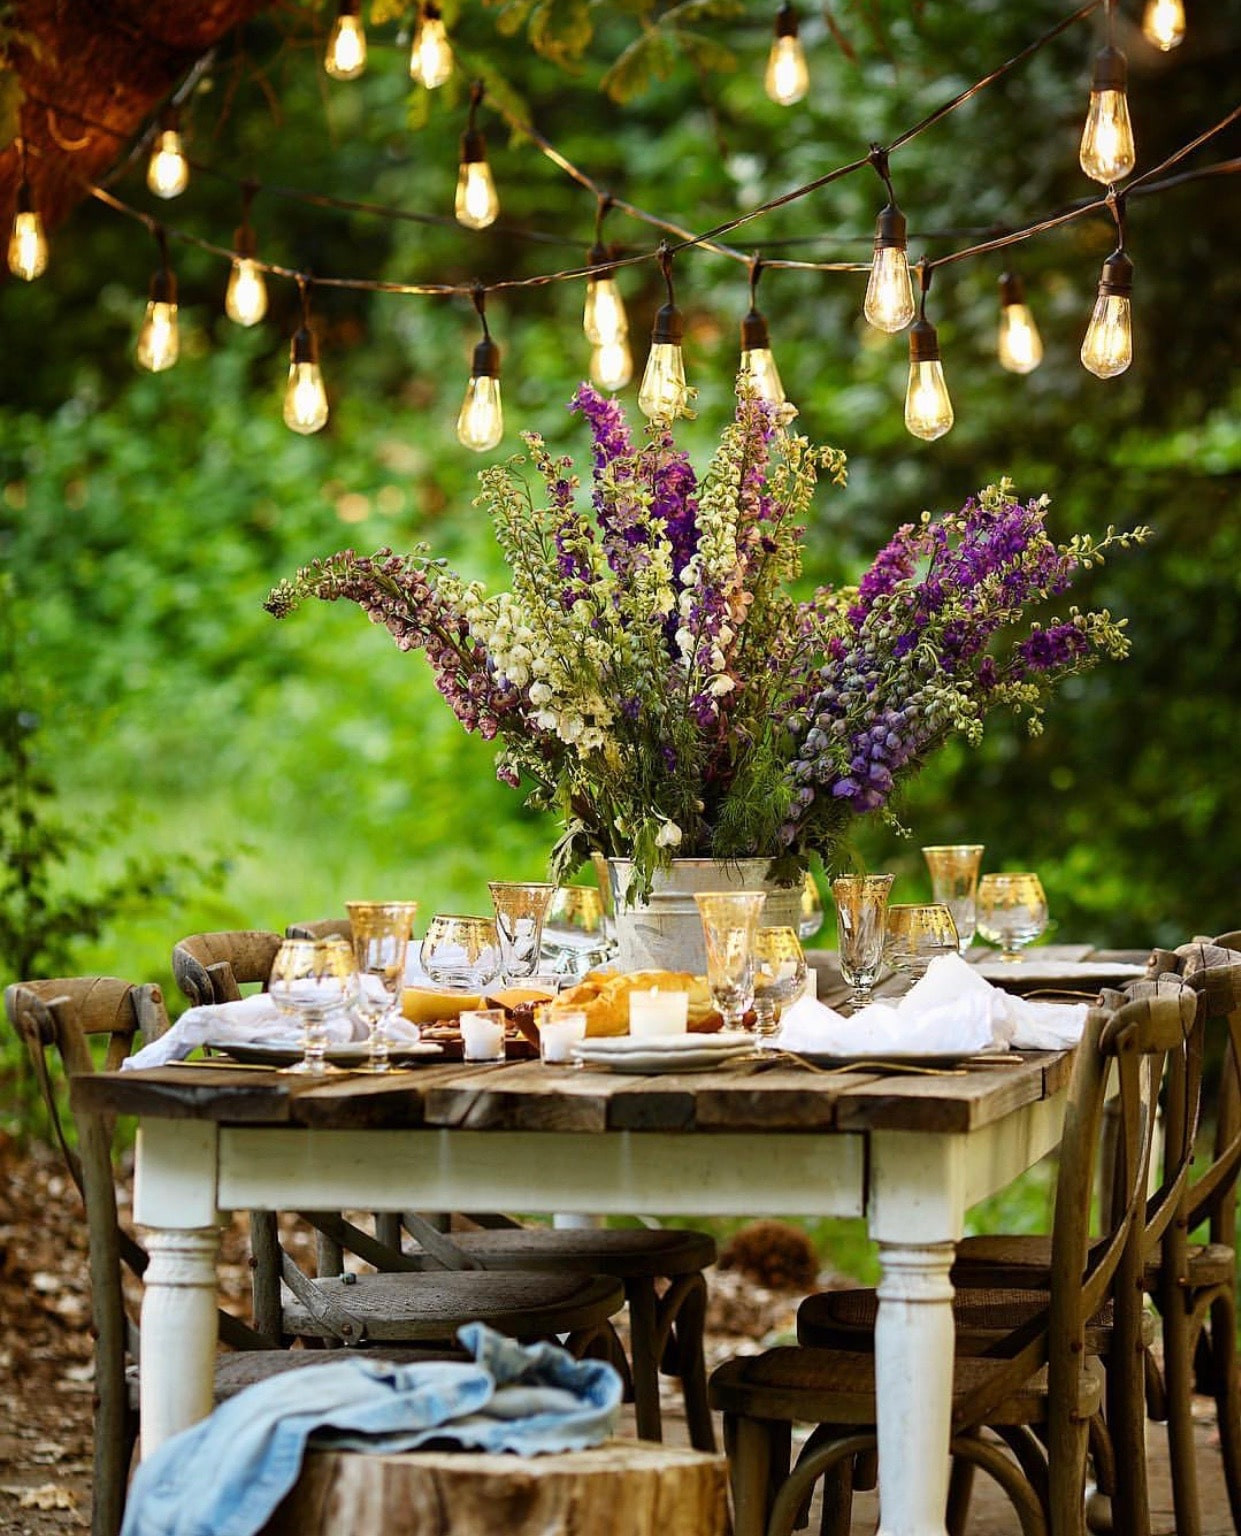 Backyard Party Ideas On Pinterest
 8 Charming outdoor party decoration ideas